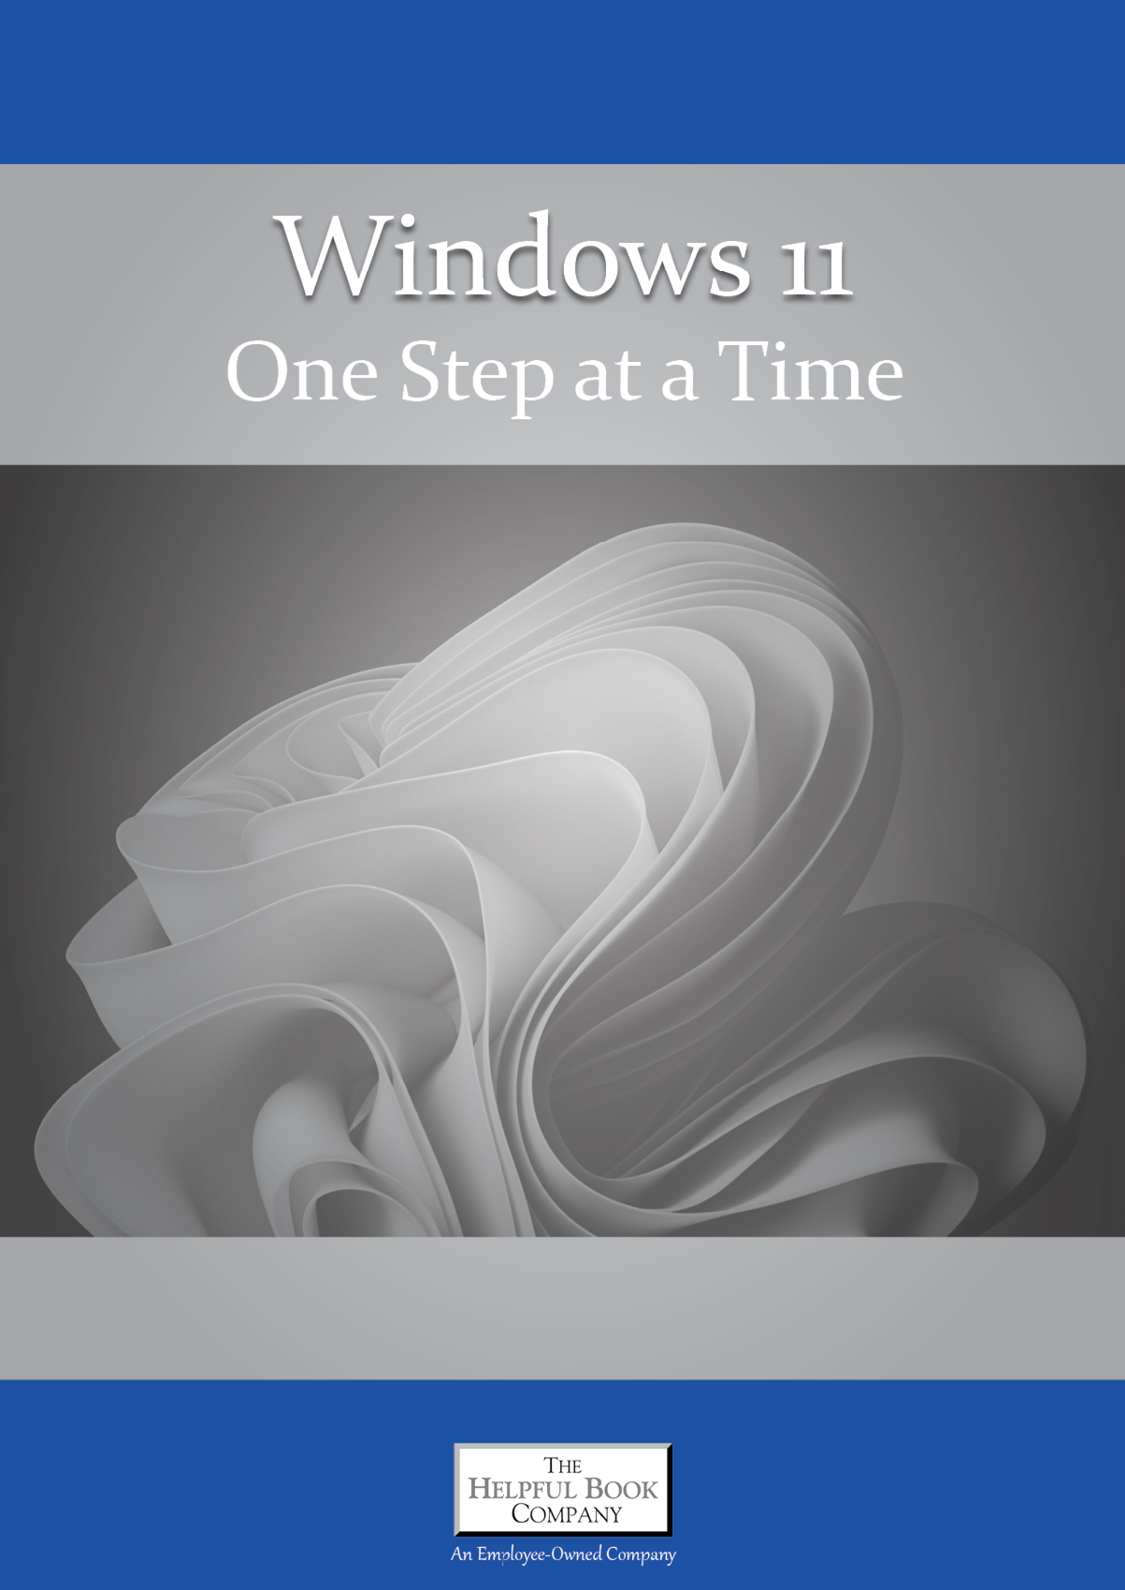 Windows 11 One Step at a Time